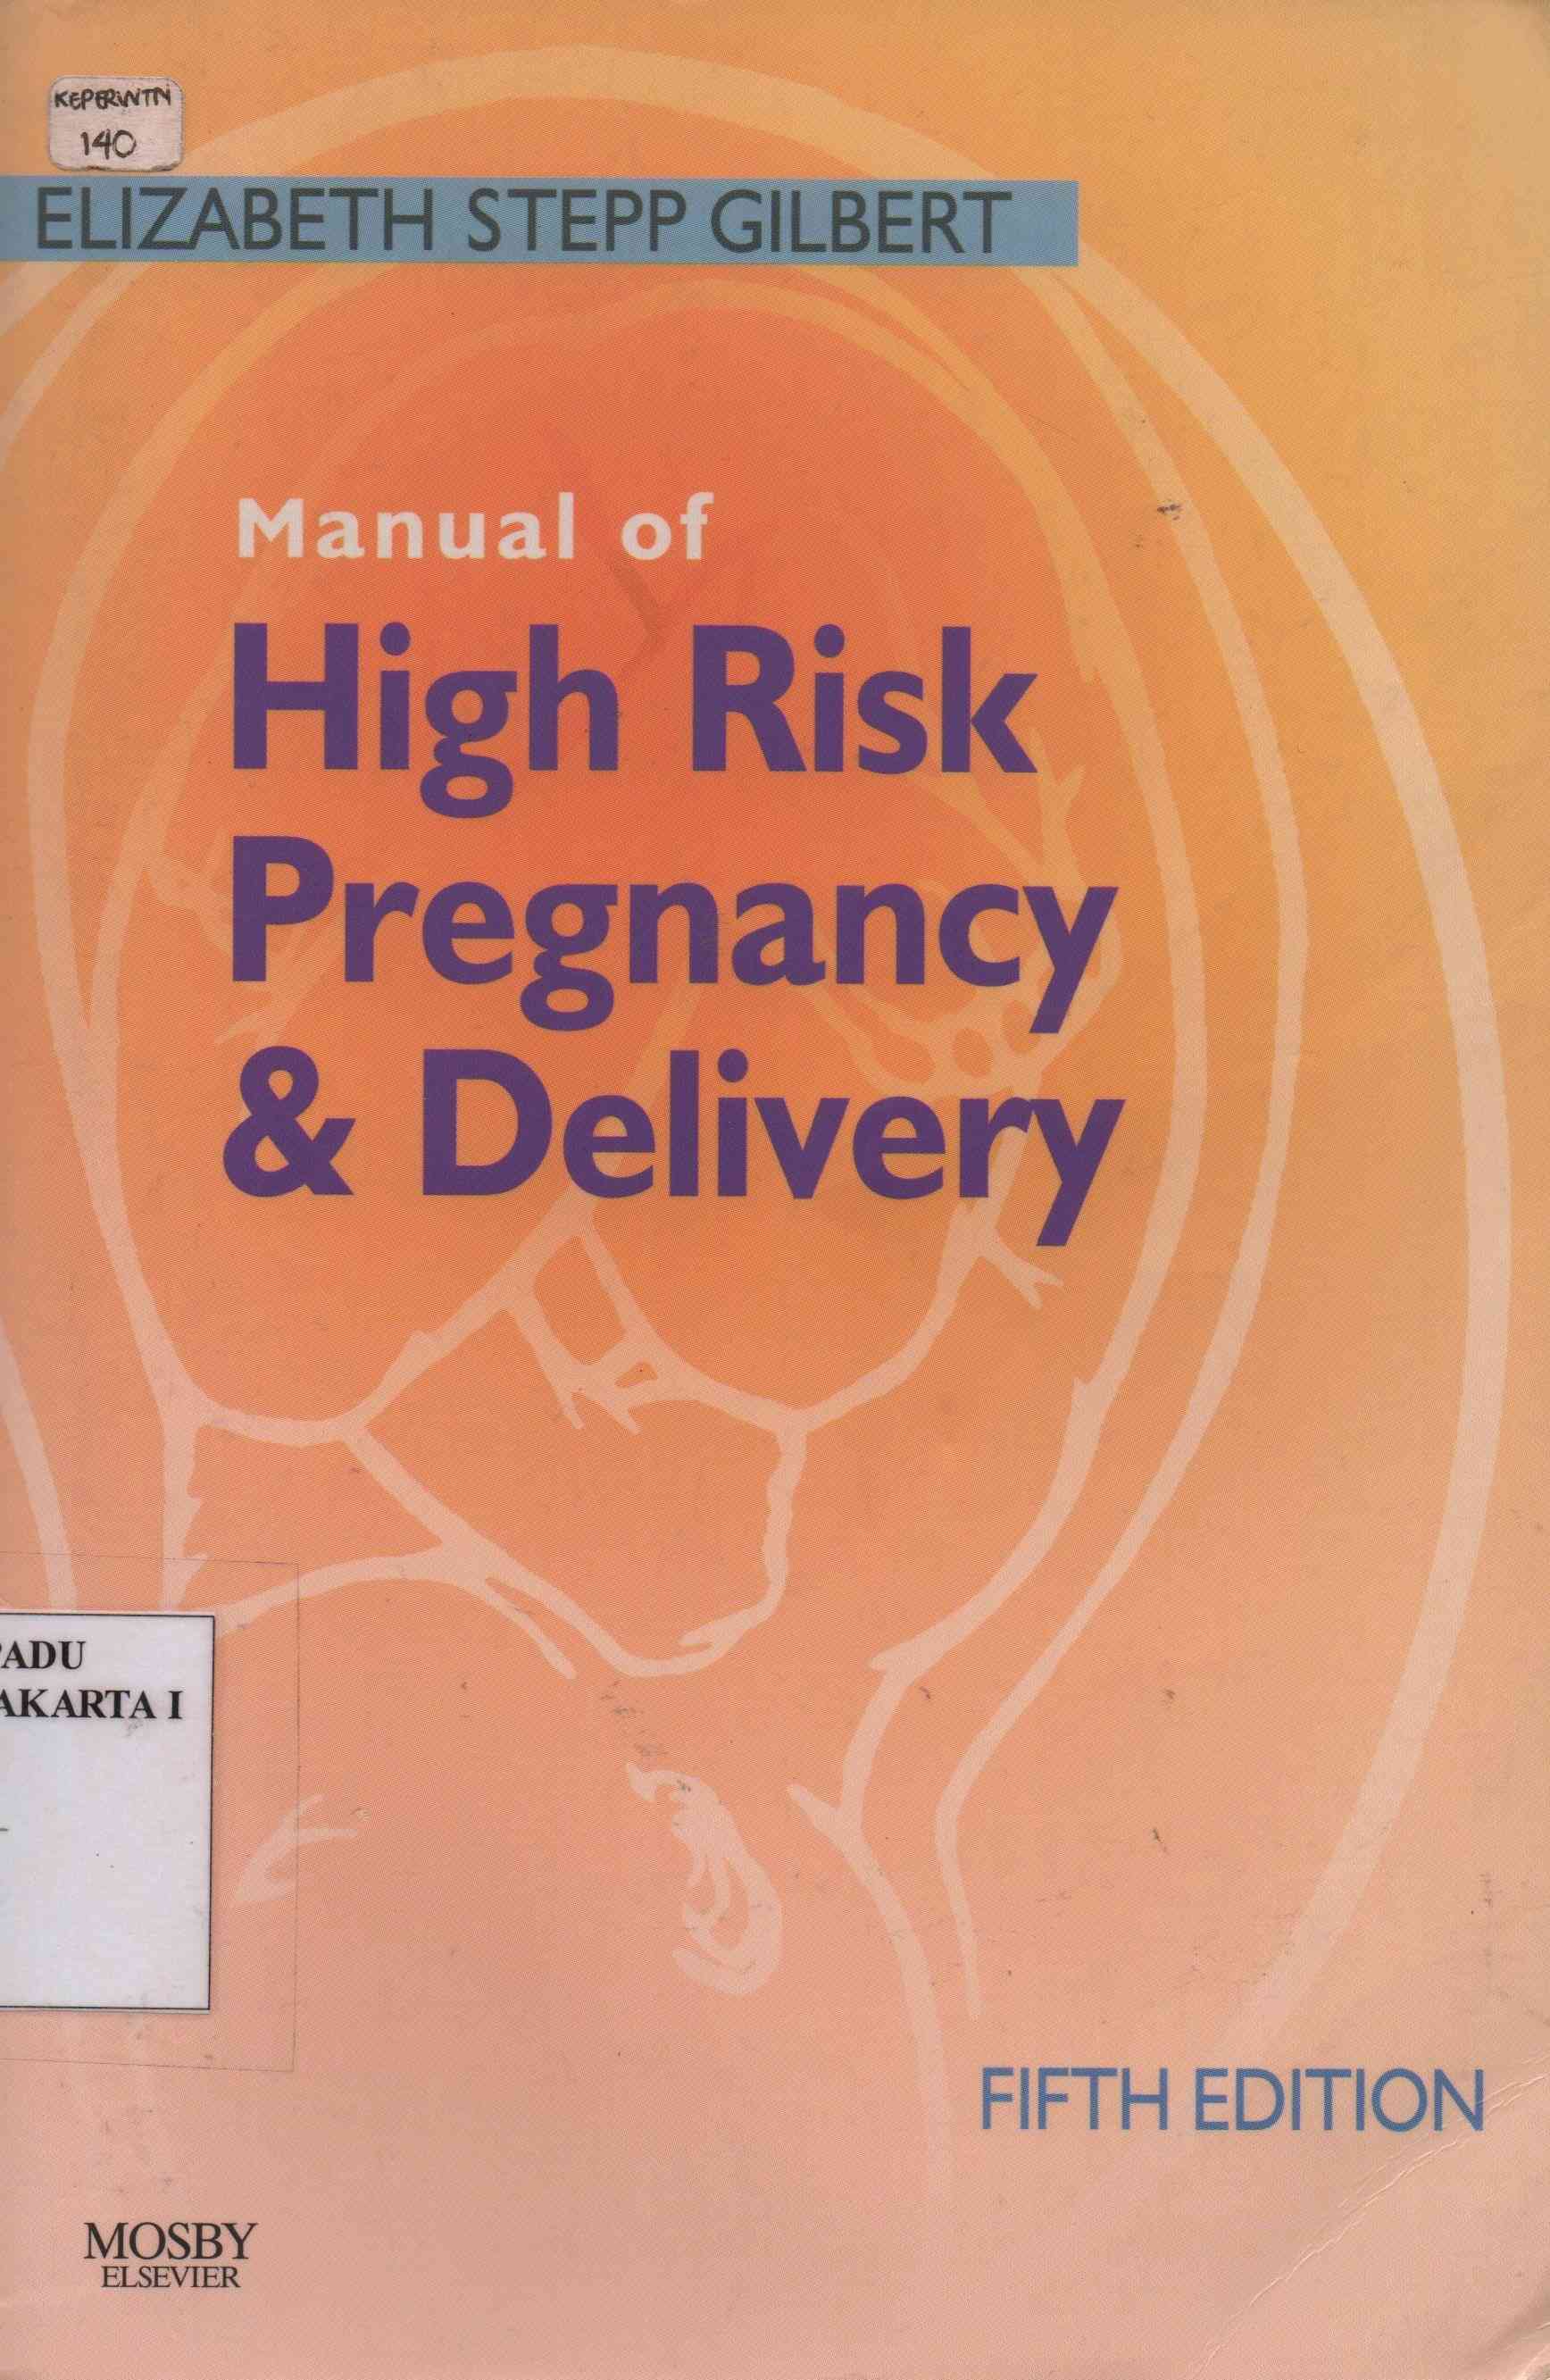 Manual of High Risk Pregnancy & Delivery (Fifth edition)